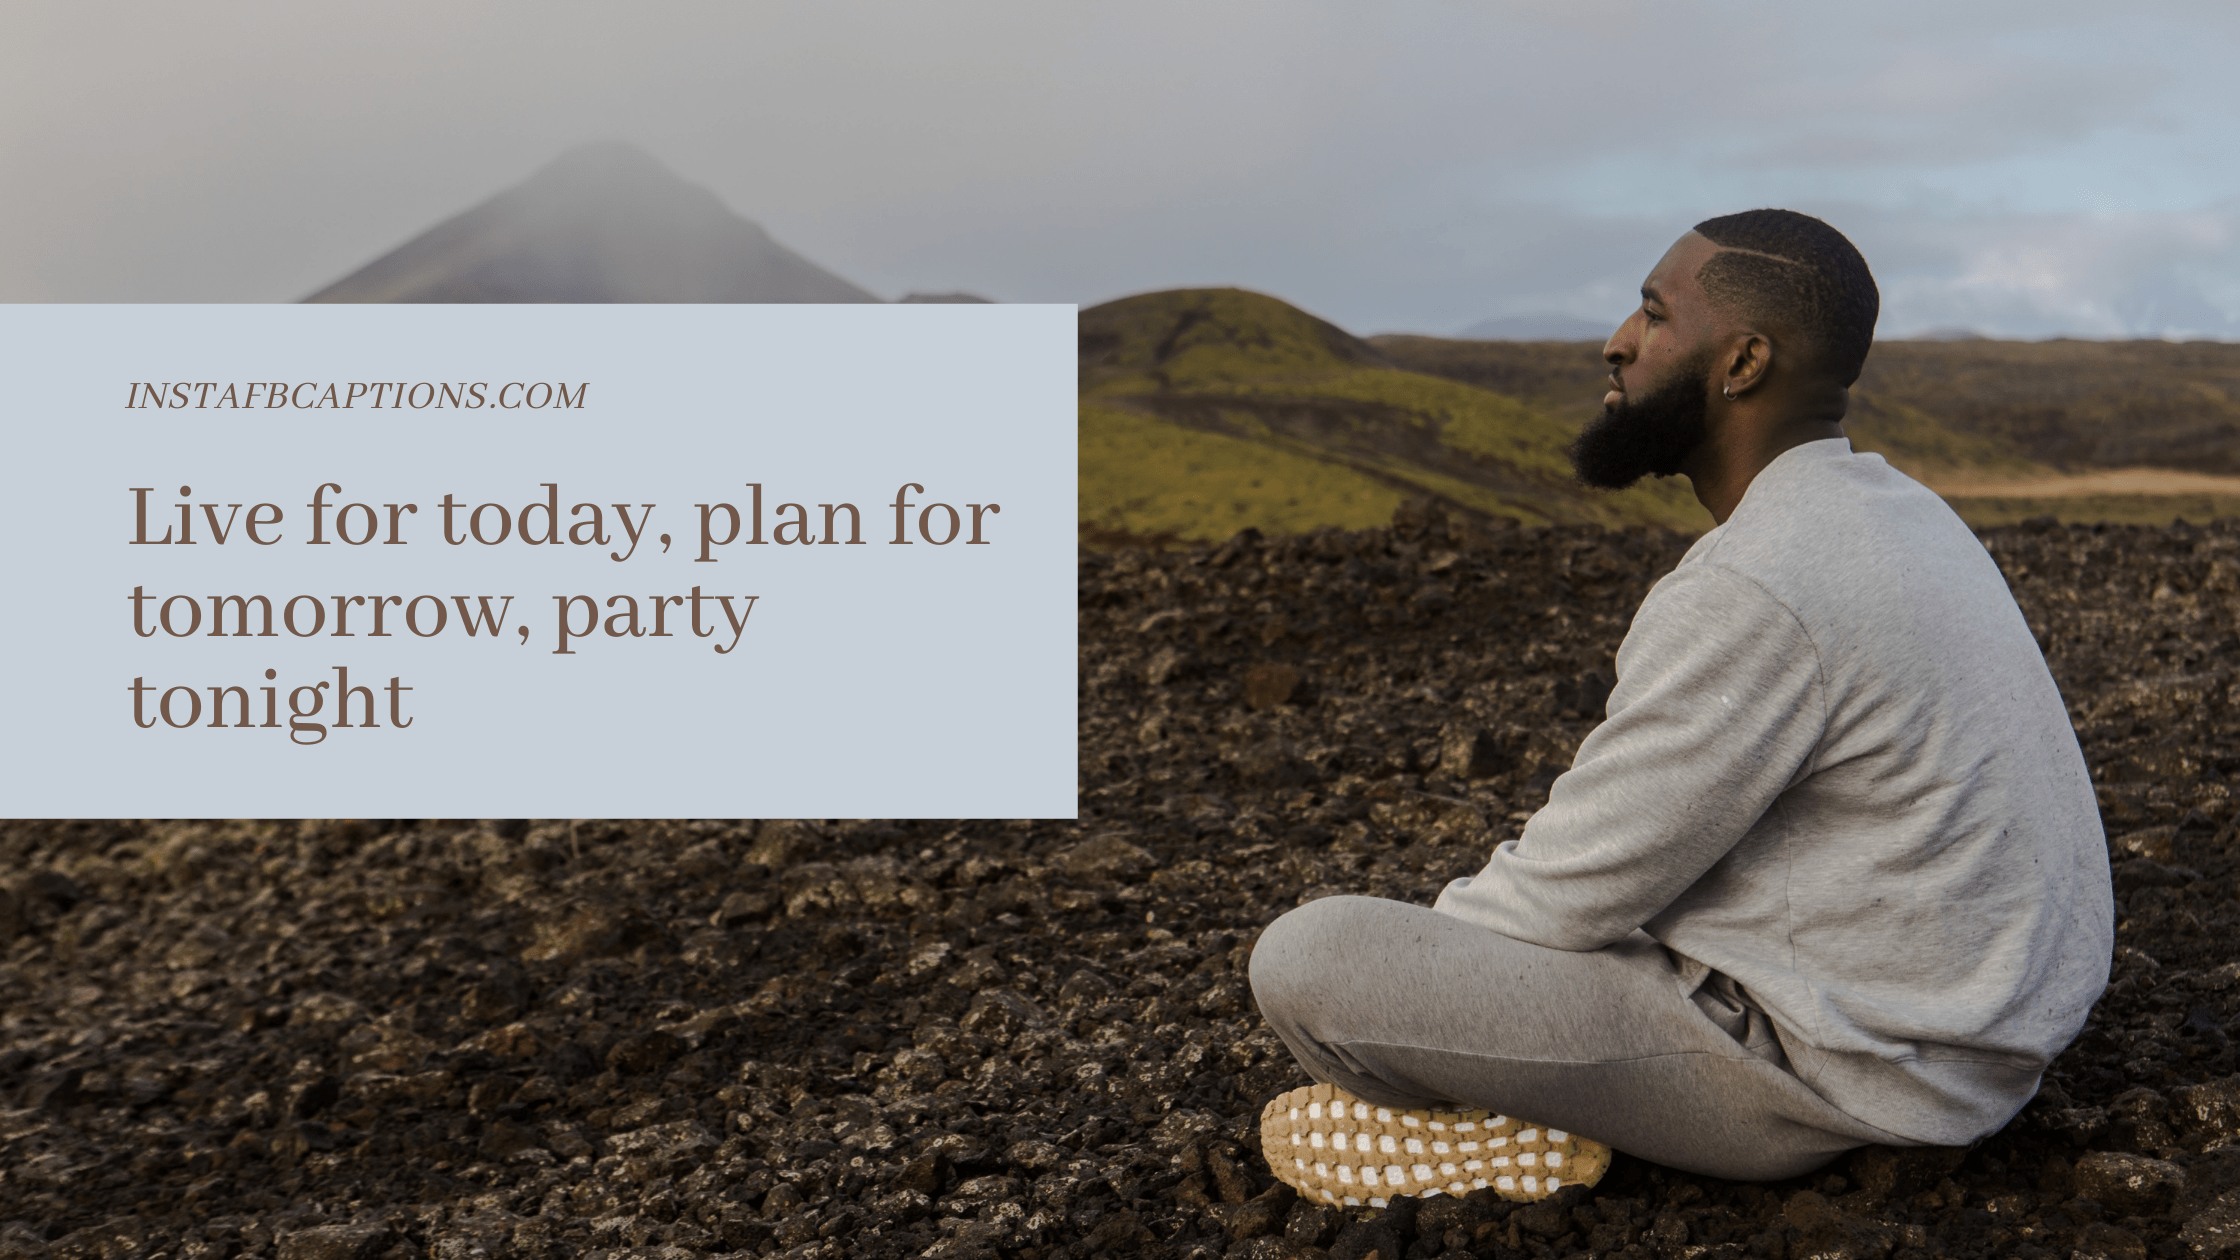 Live for today, plan for tomorrow, party tonight  - Motivational Captions for Boys Men - [Motivational] Captions For Positive Instagram Posts in 2023